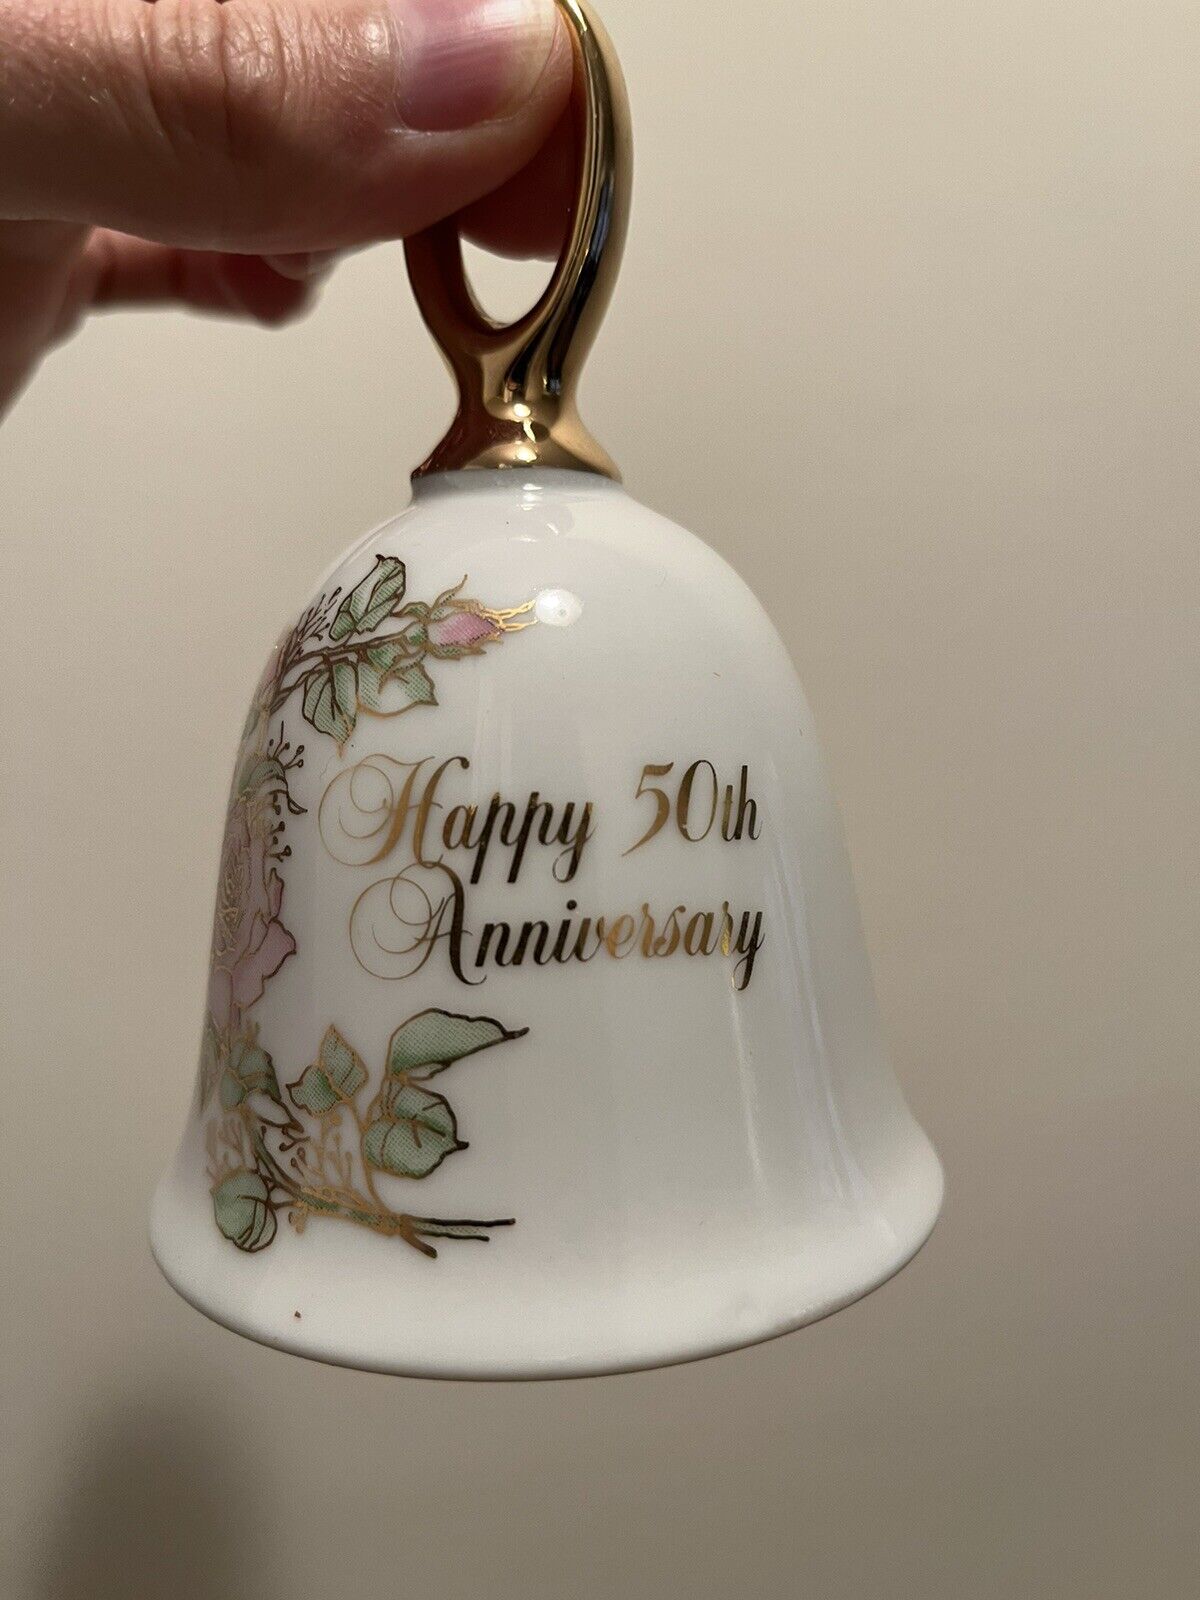 Happy 50th Anniversary 4.5” Porcelain Bell Pink Roses Gold. Anniversary Wishes